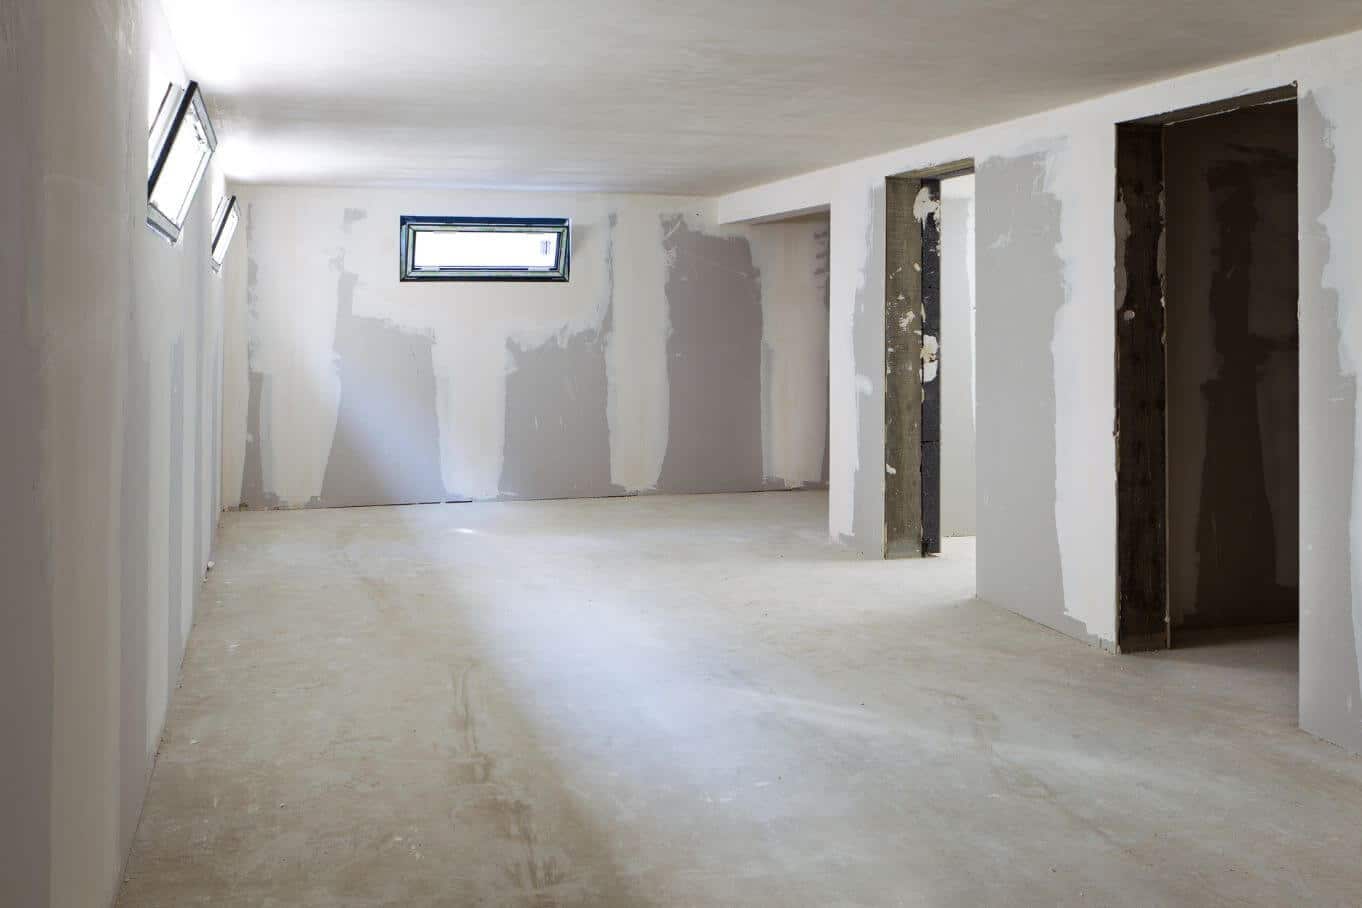 Biggest Challenges When Finishing a Basement